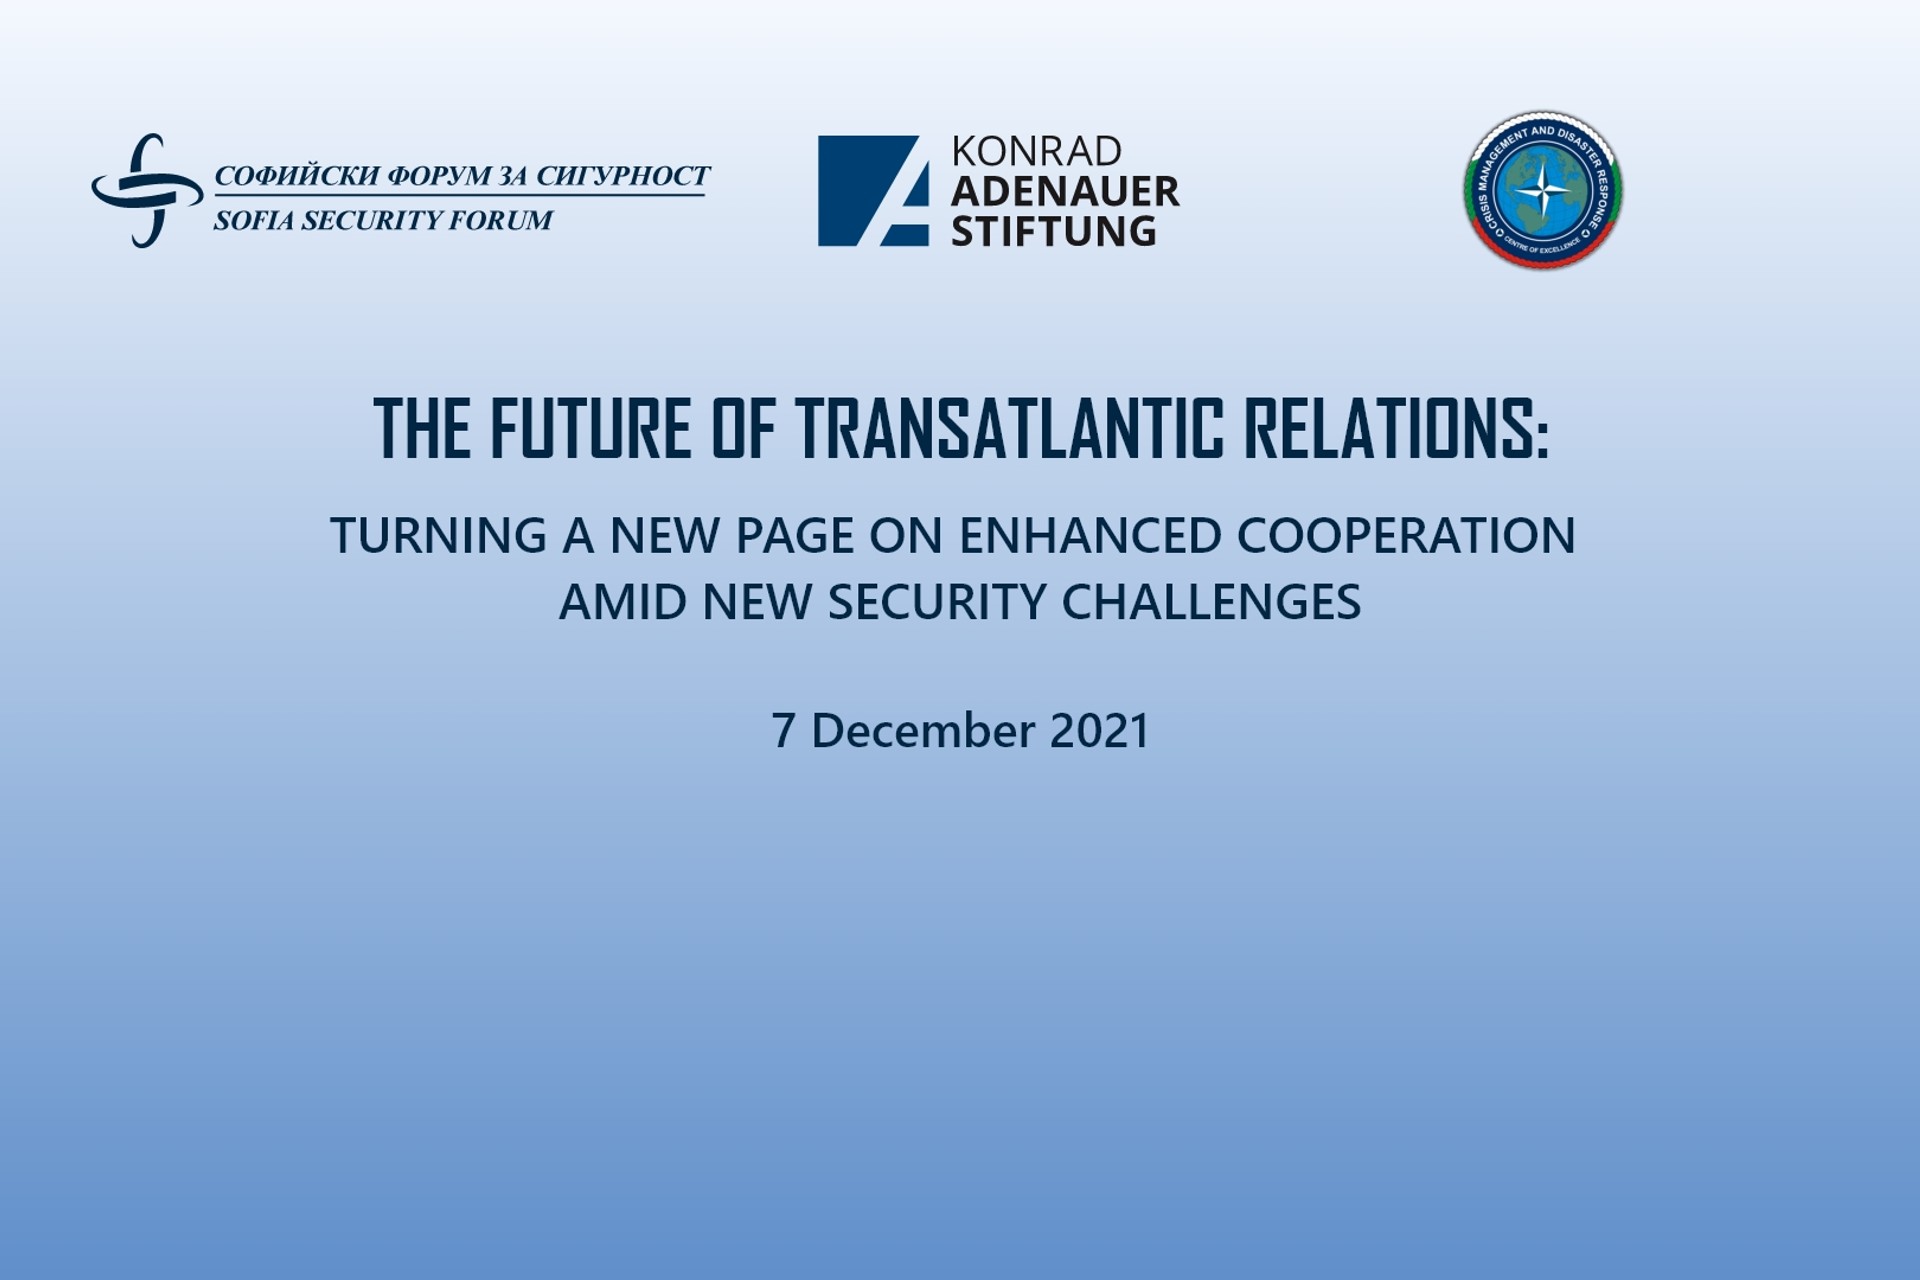 THE FUTURE OF TRANSATLANTIC RELATIONS: TURNING A NEW PAGE ON ENHANCED COOPERATION